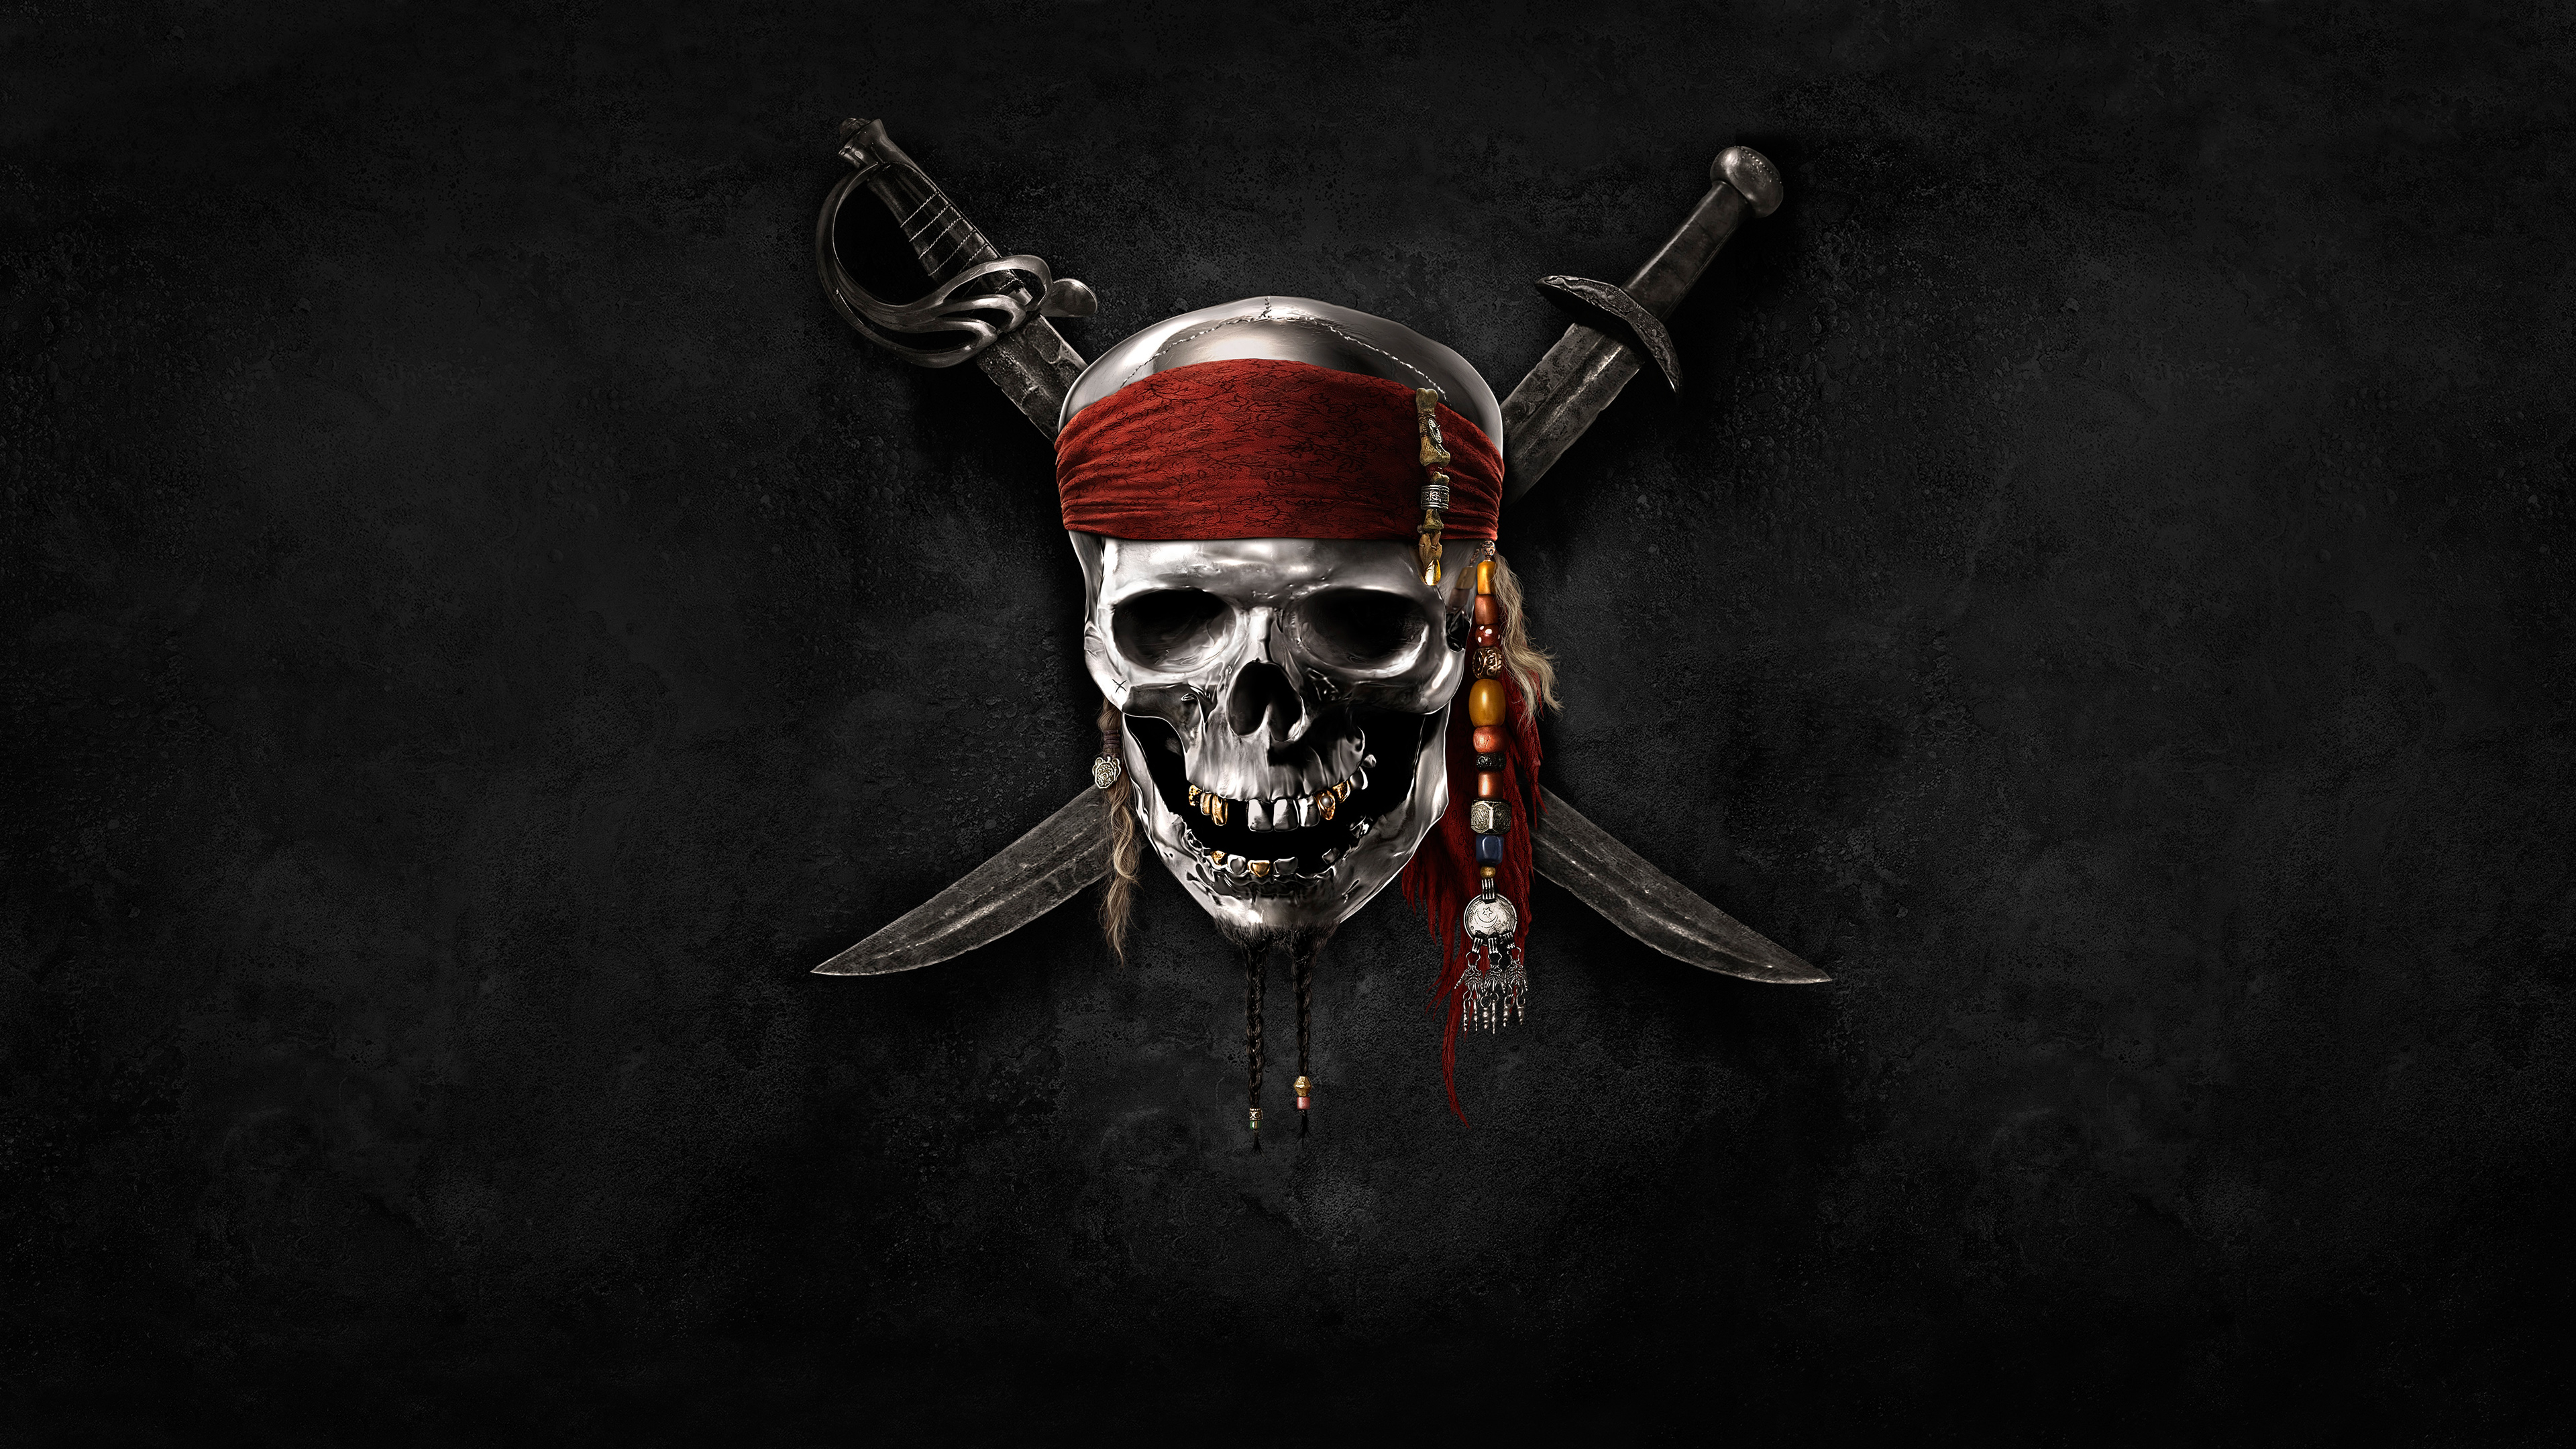 3840x2160 160+ Pirate HD Wallpapers and Backgrounds